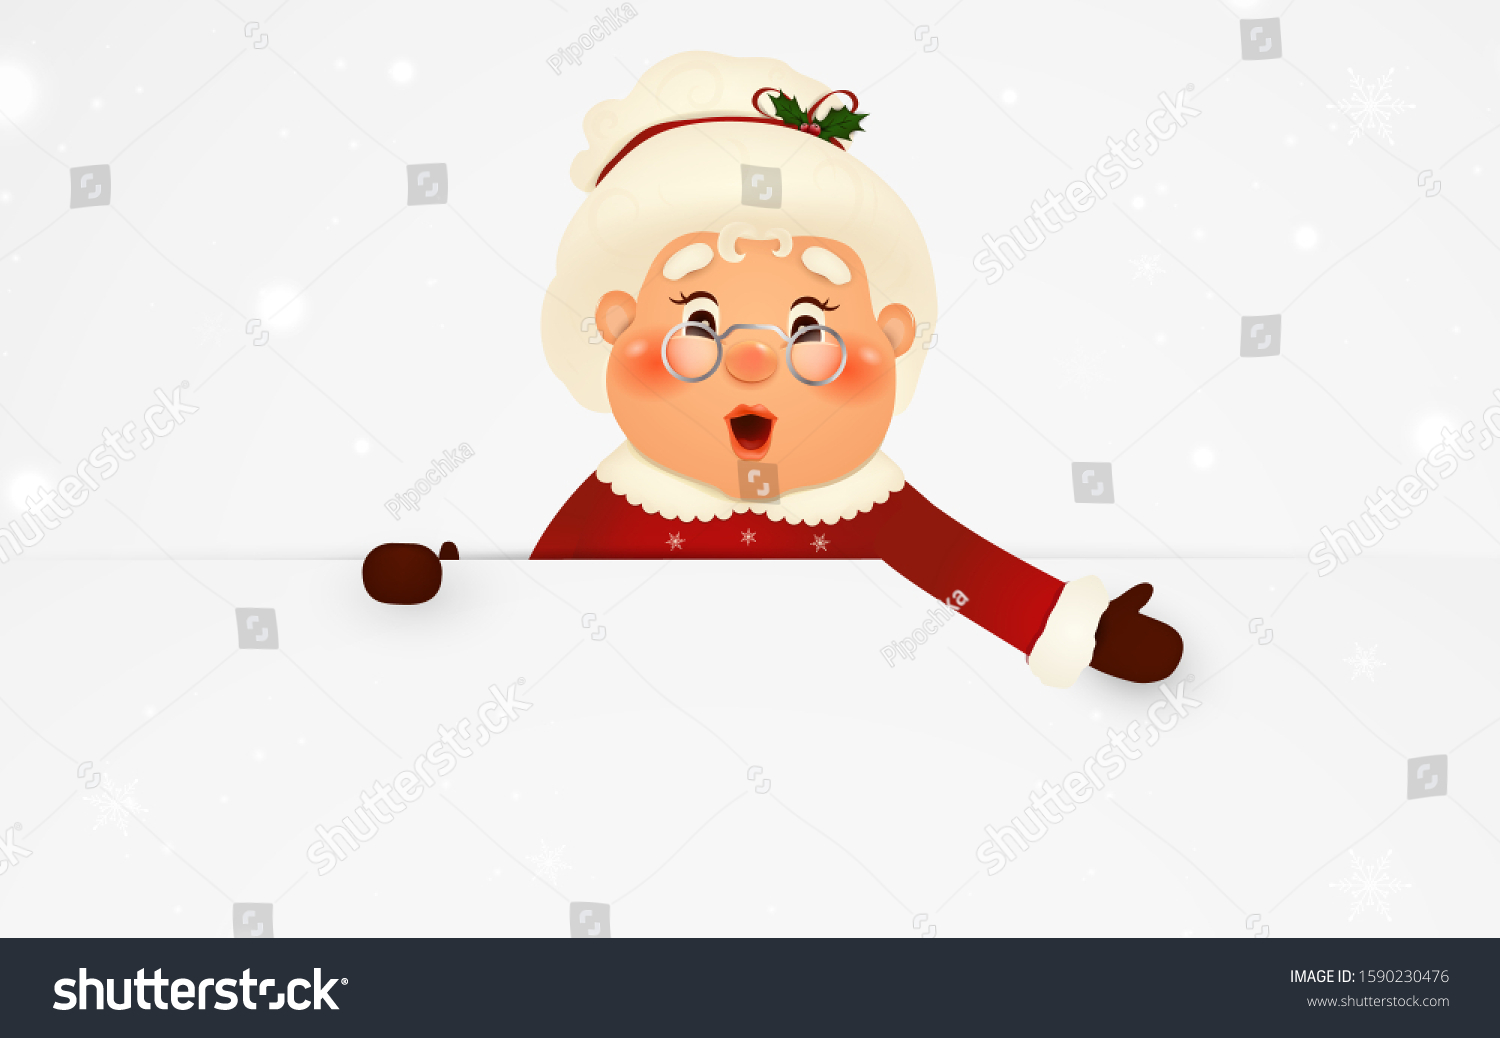 Happy Mrs Claus Cartoon Character Standing Stock Vector Royalty Free 1590230476